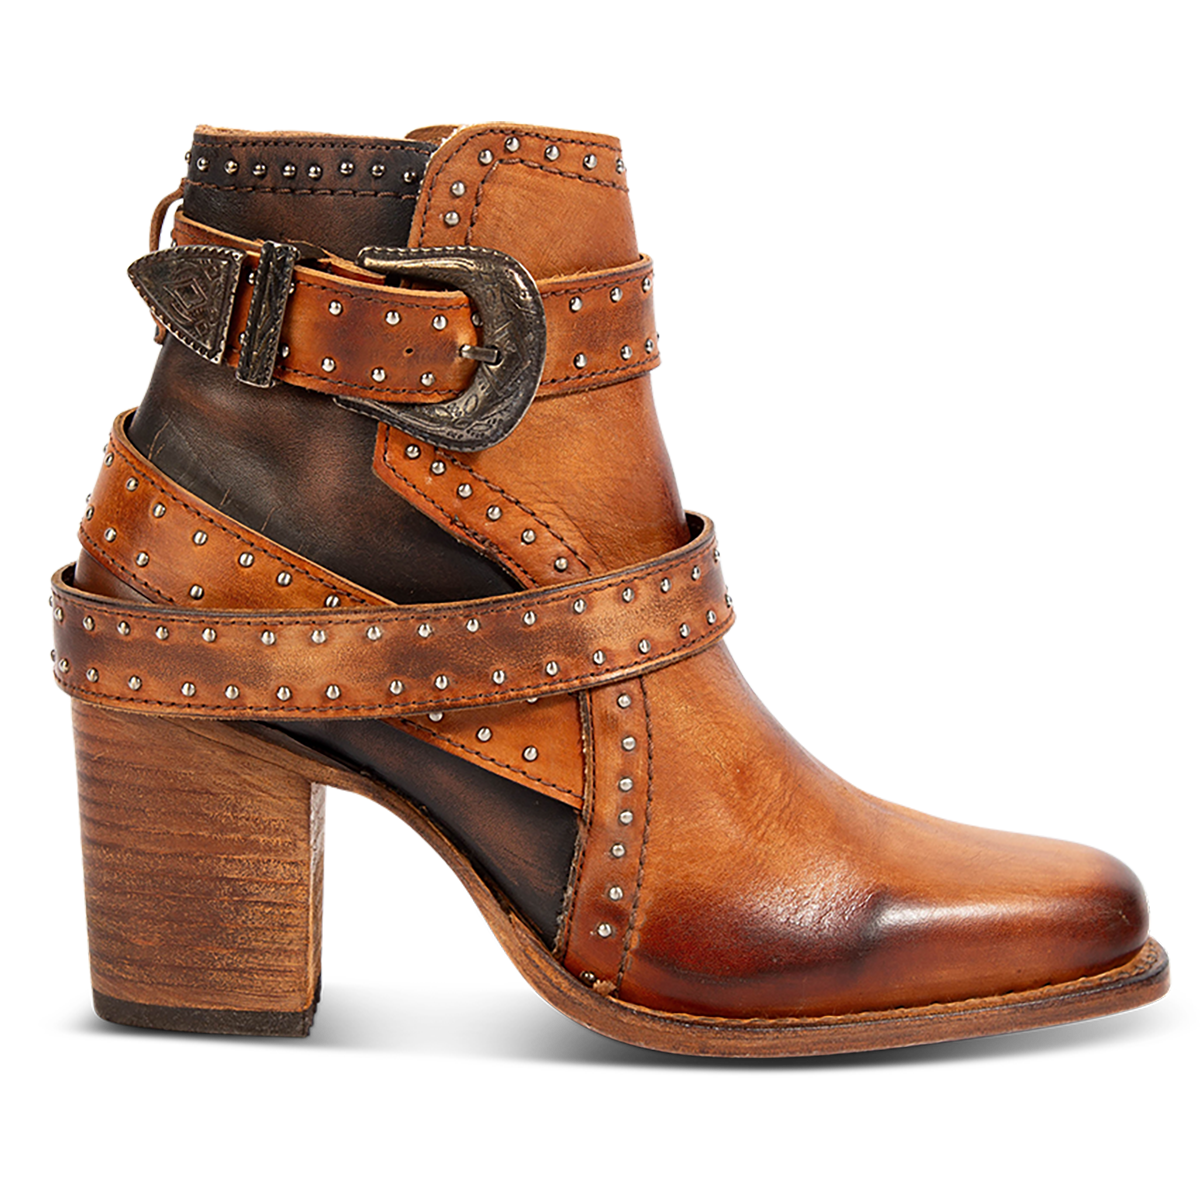 FREEBIRD women's Patsy whiskey leather bootie with a brass hardware belt, silver stud elements and inside working brass zipper